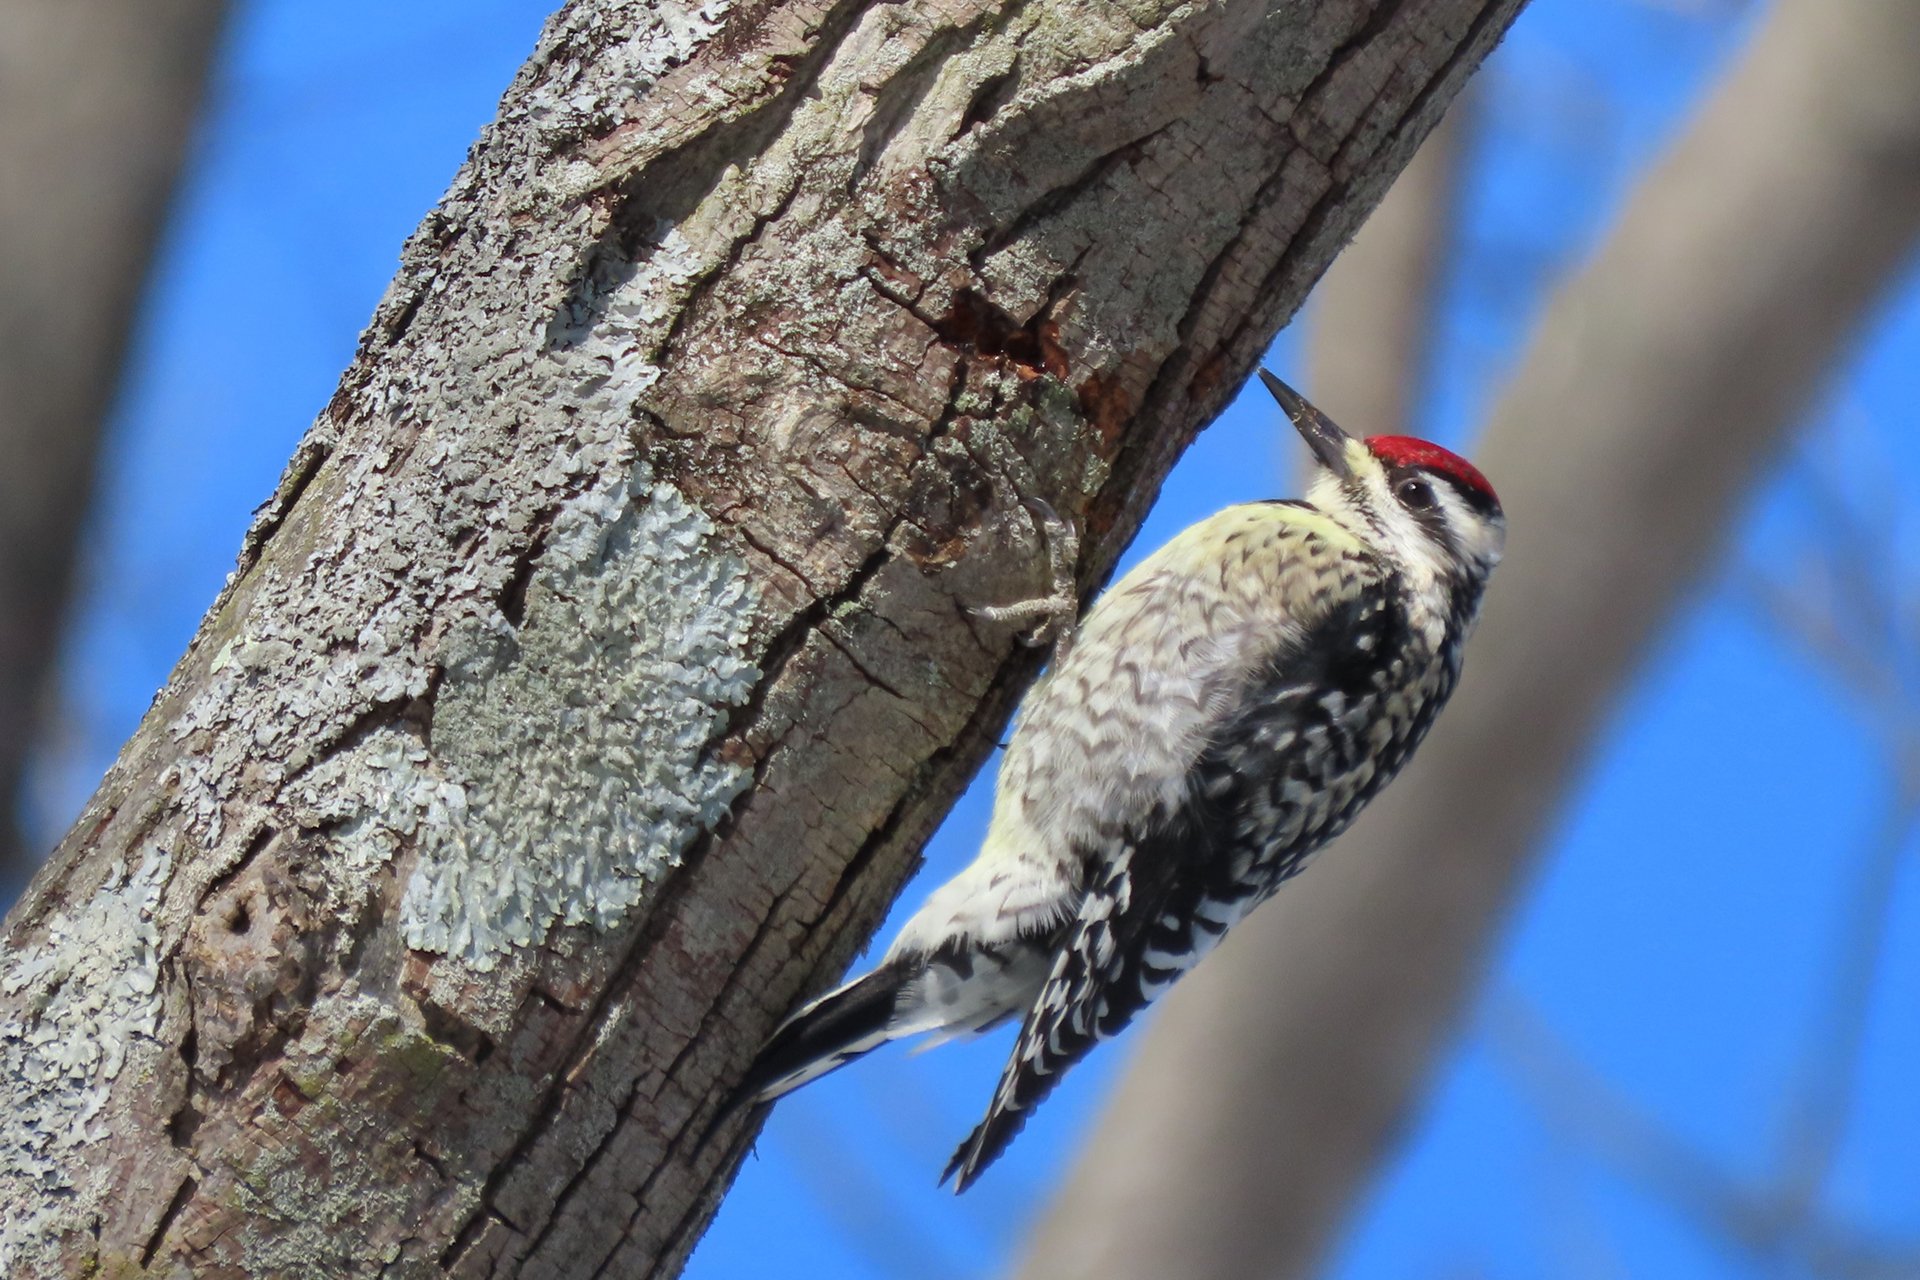 Yellow-bellied Sapsucker hanging on to a tree trunk